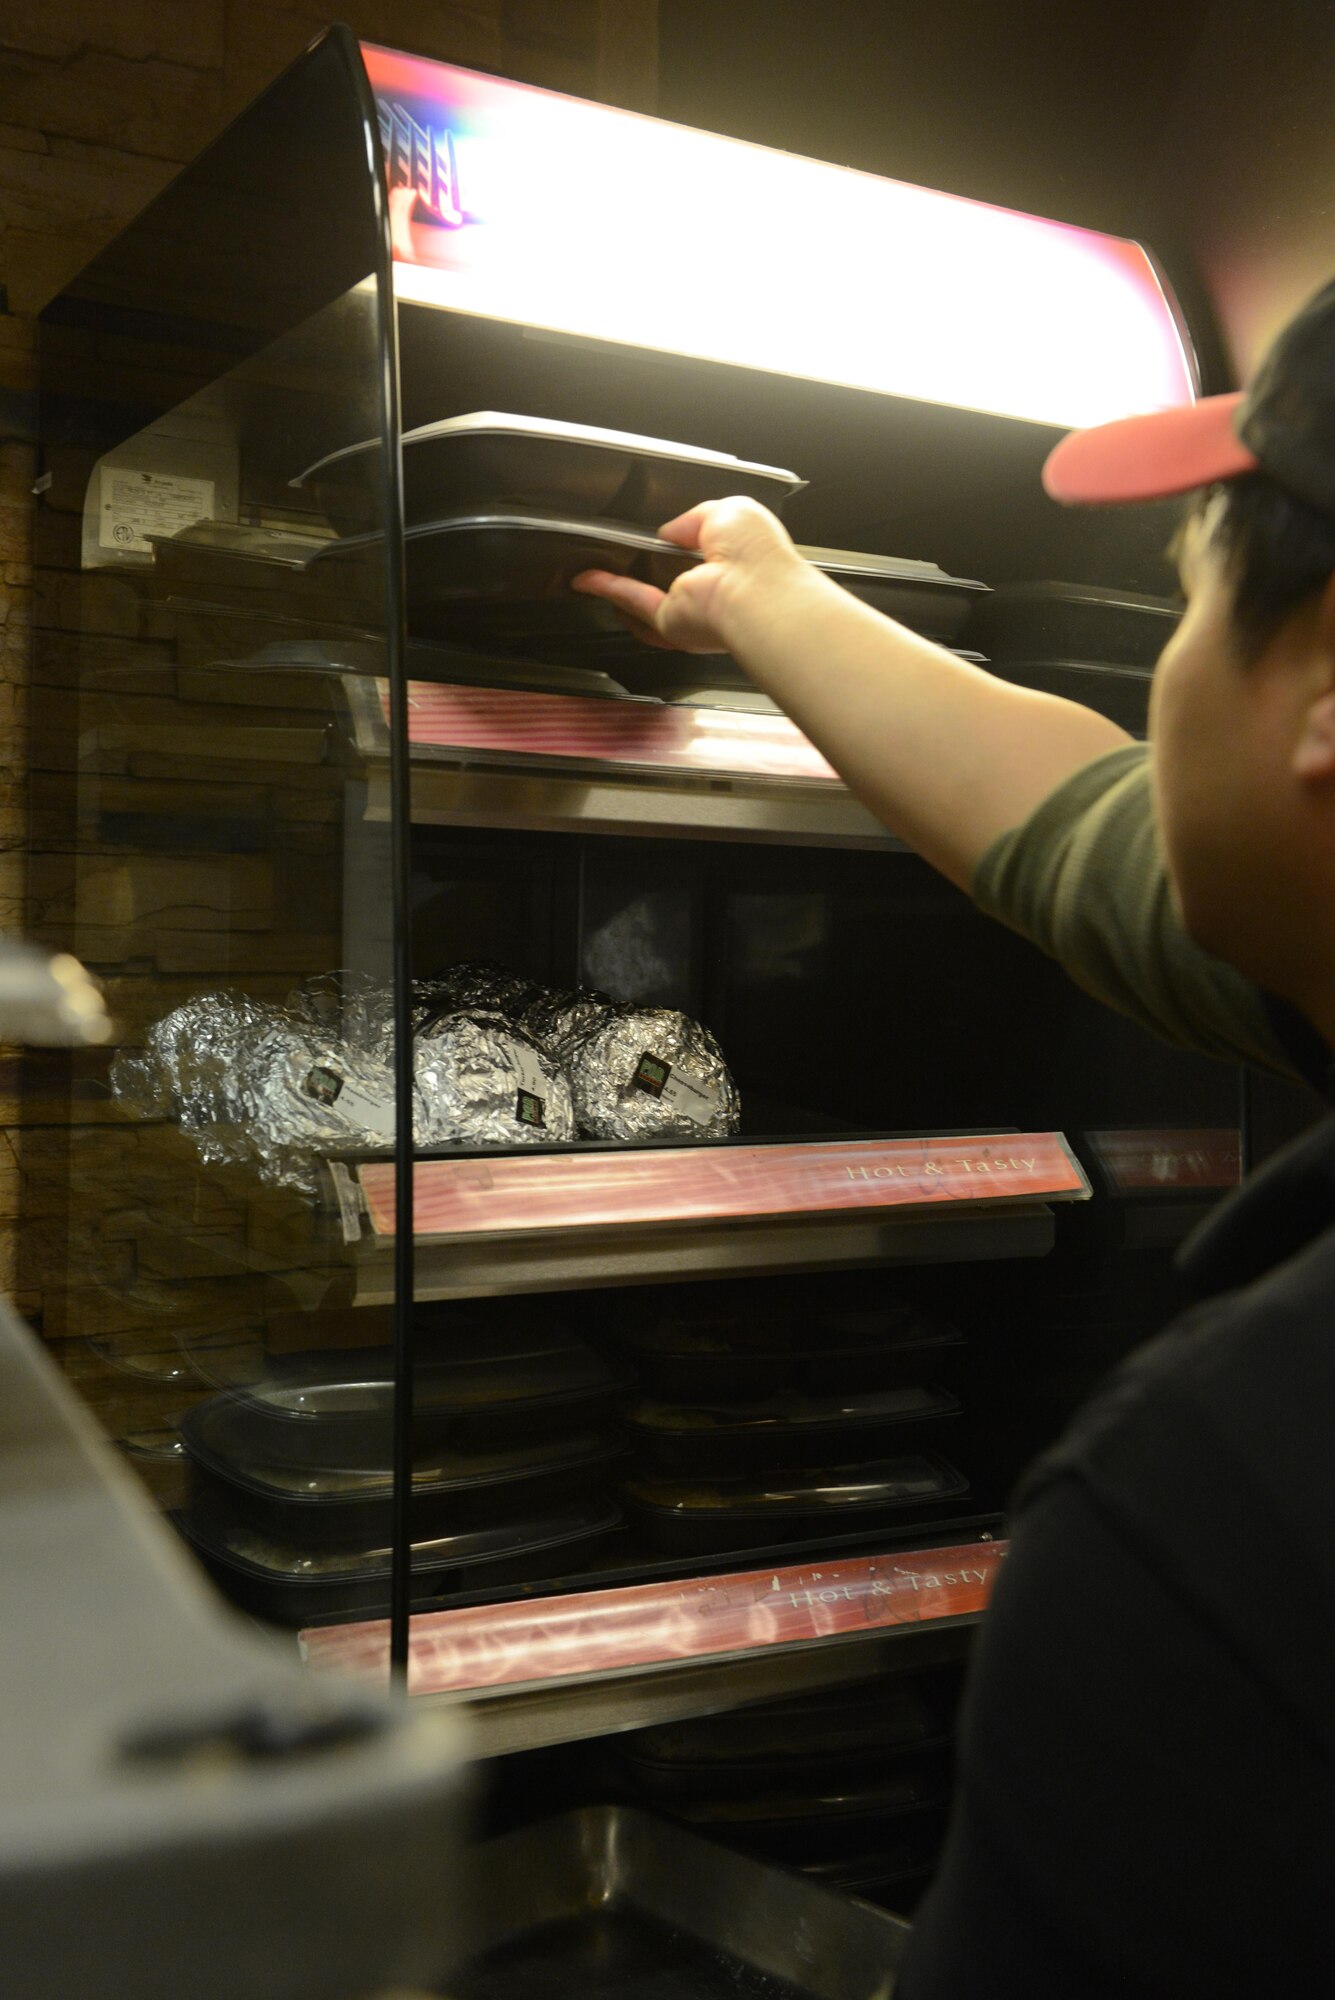 Rodel Magno, 673d Force Support Squadron Iditarod Dining Facility cook, places hot meals under heat lamps at the Provisions on Demand at Joint Base Elmendorf-Richardson, Alaska, April 25, 2017. The meals are in to-go containers because the POD’s primary customers are flightline personnel who do not have a lot of time and need hot meals.